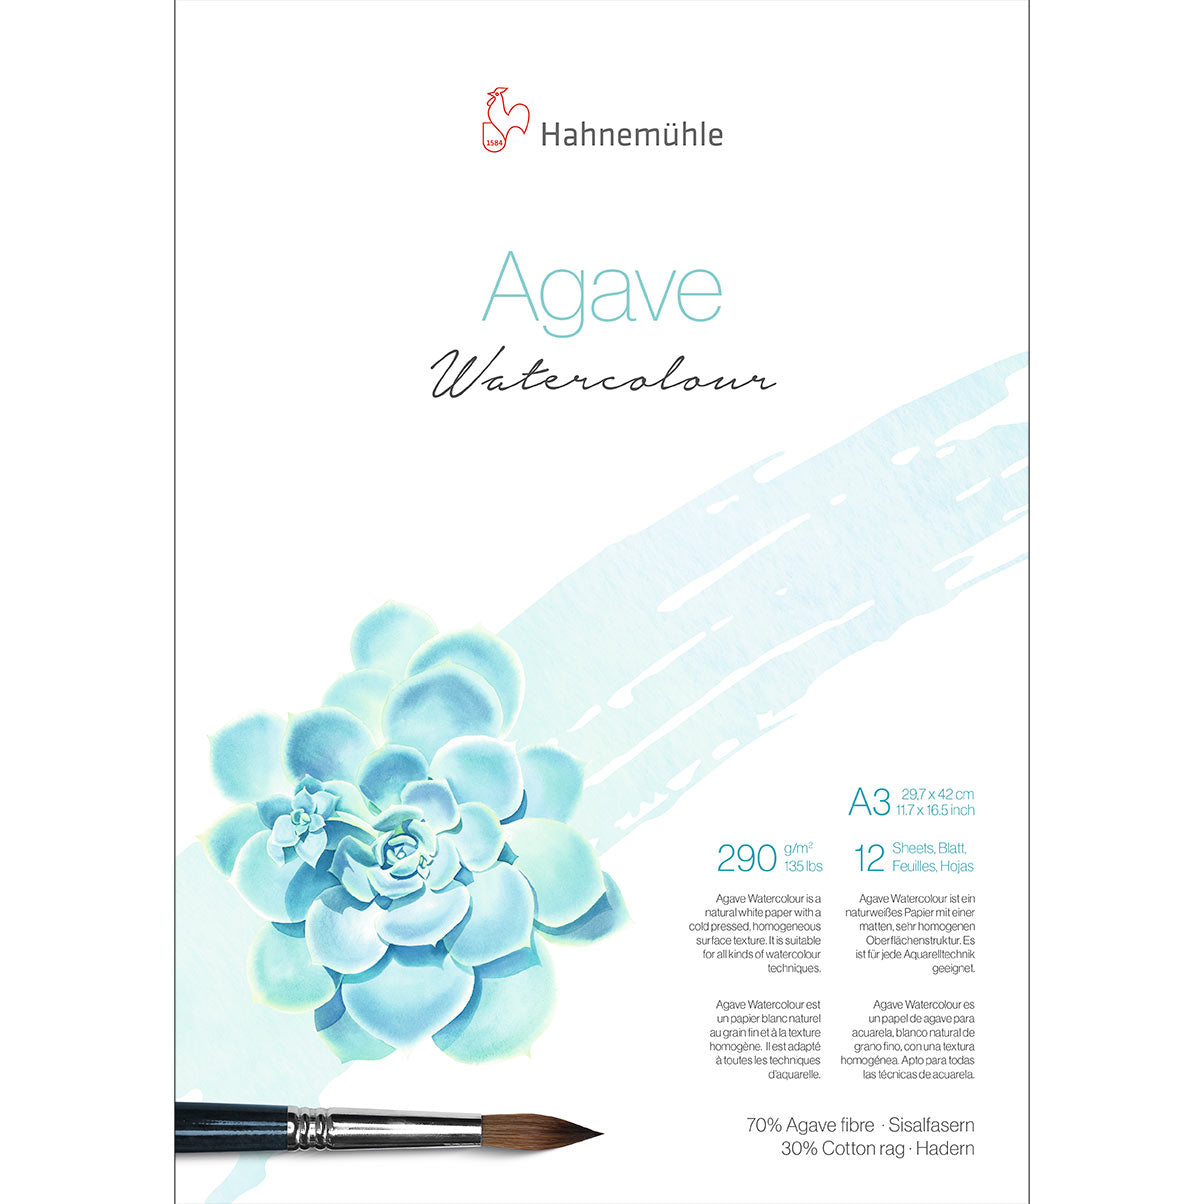 Hahnemuhle - Agave Watercolour Block  Cold Pressed 290gsm A3